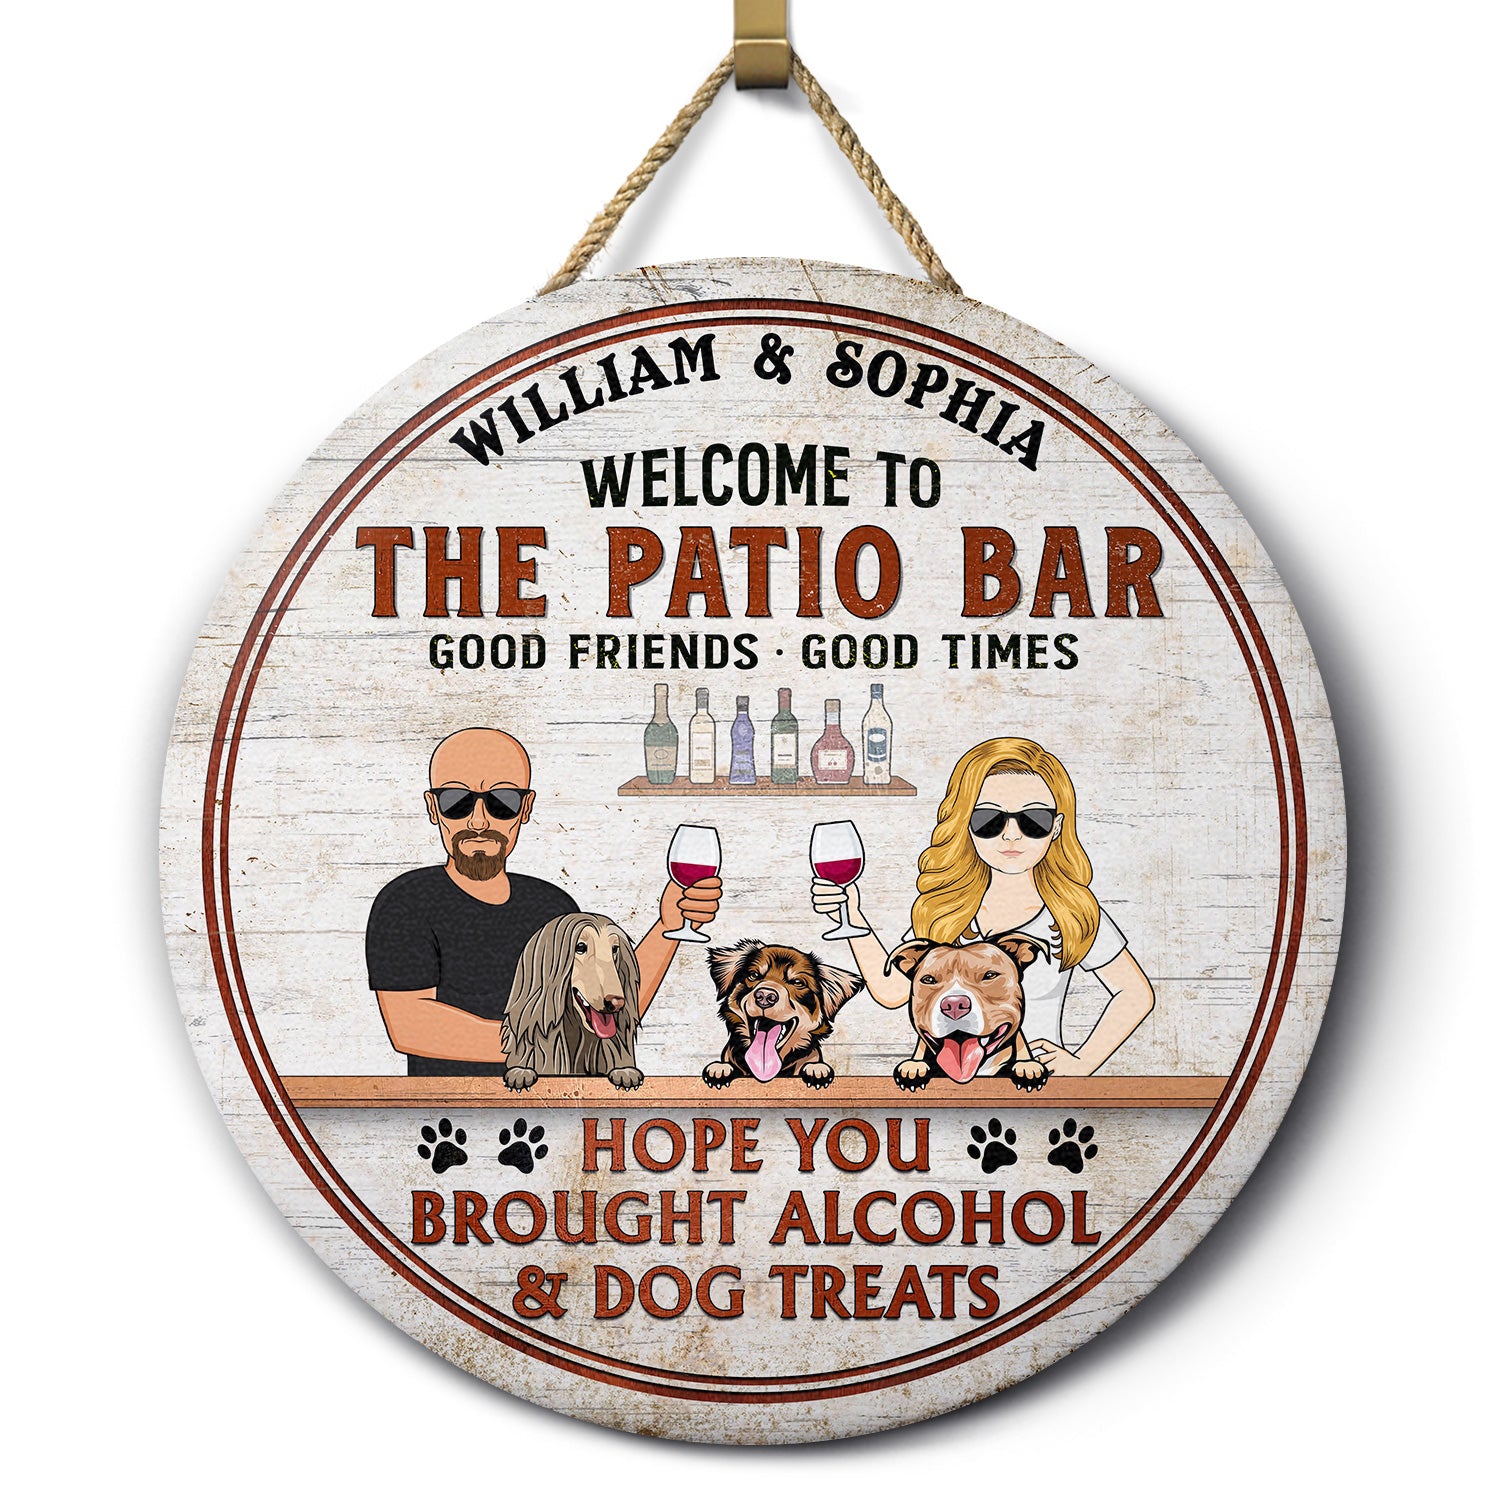 Hope You Brought Alcohol And Dog Treats Couple Husband Wife Grilling Patio - Backyard Sign - Personalized Custom Wood Circle Sign